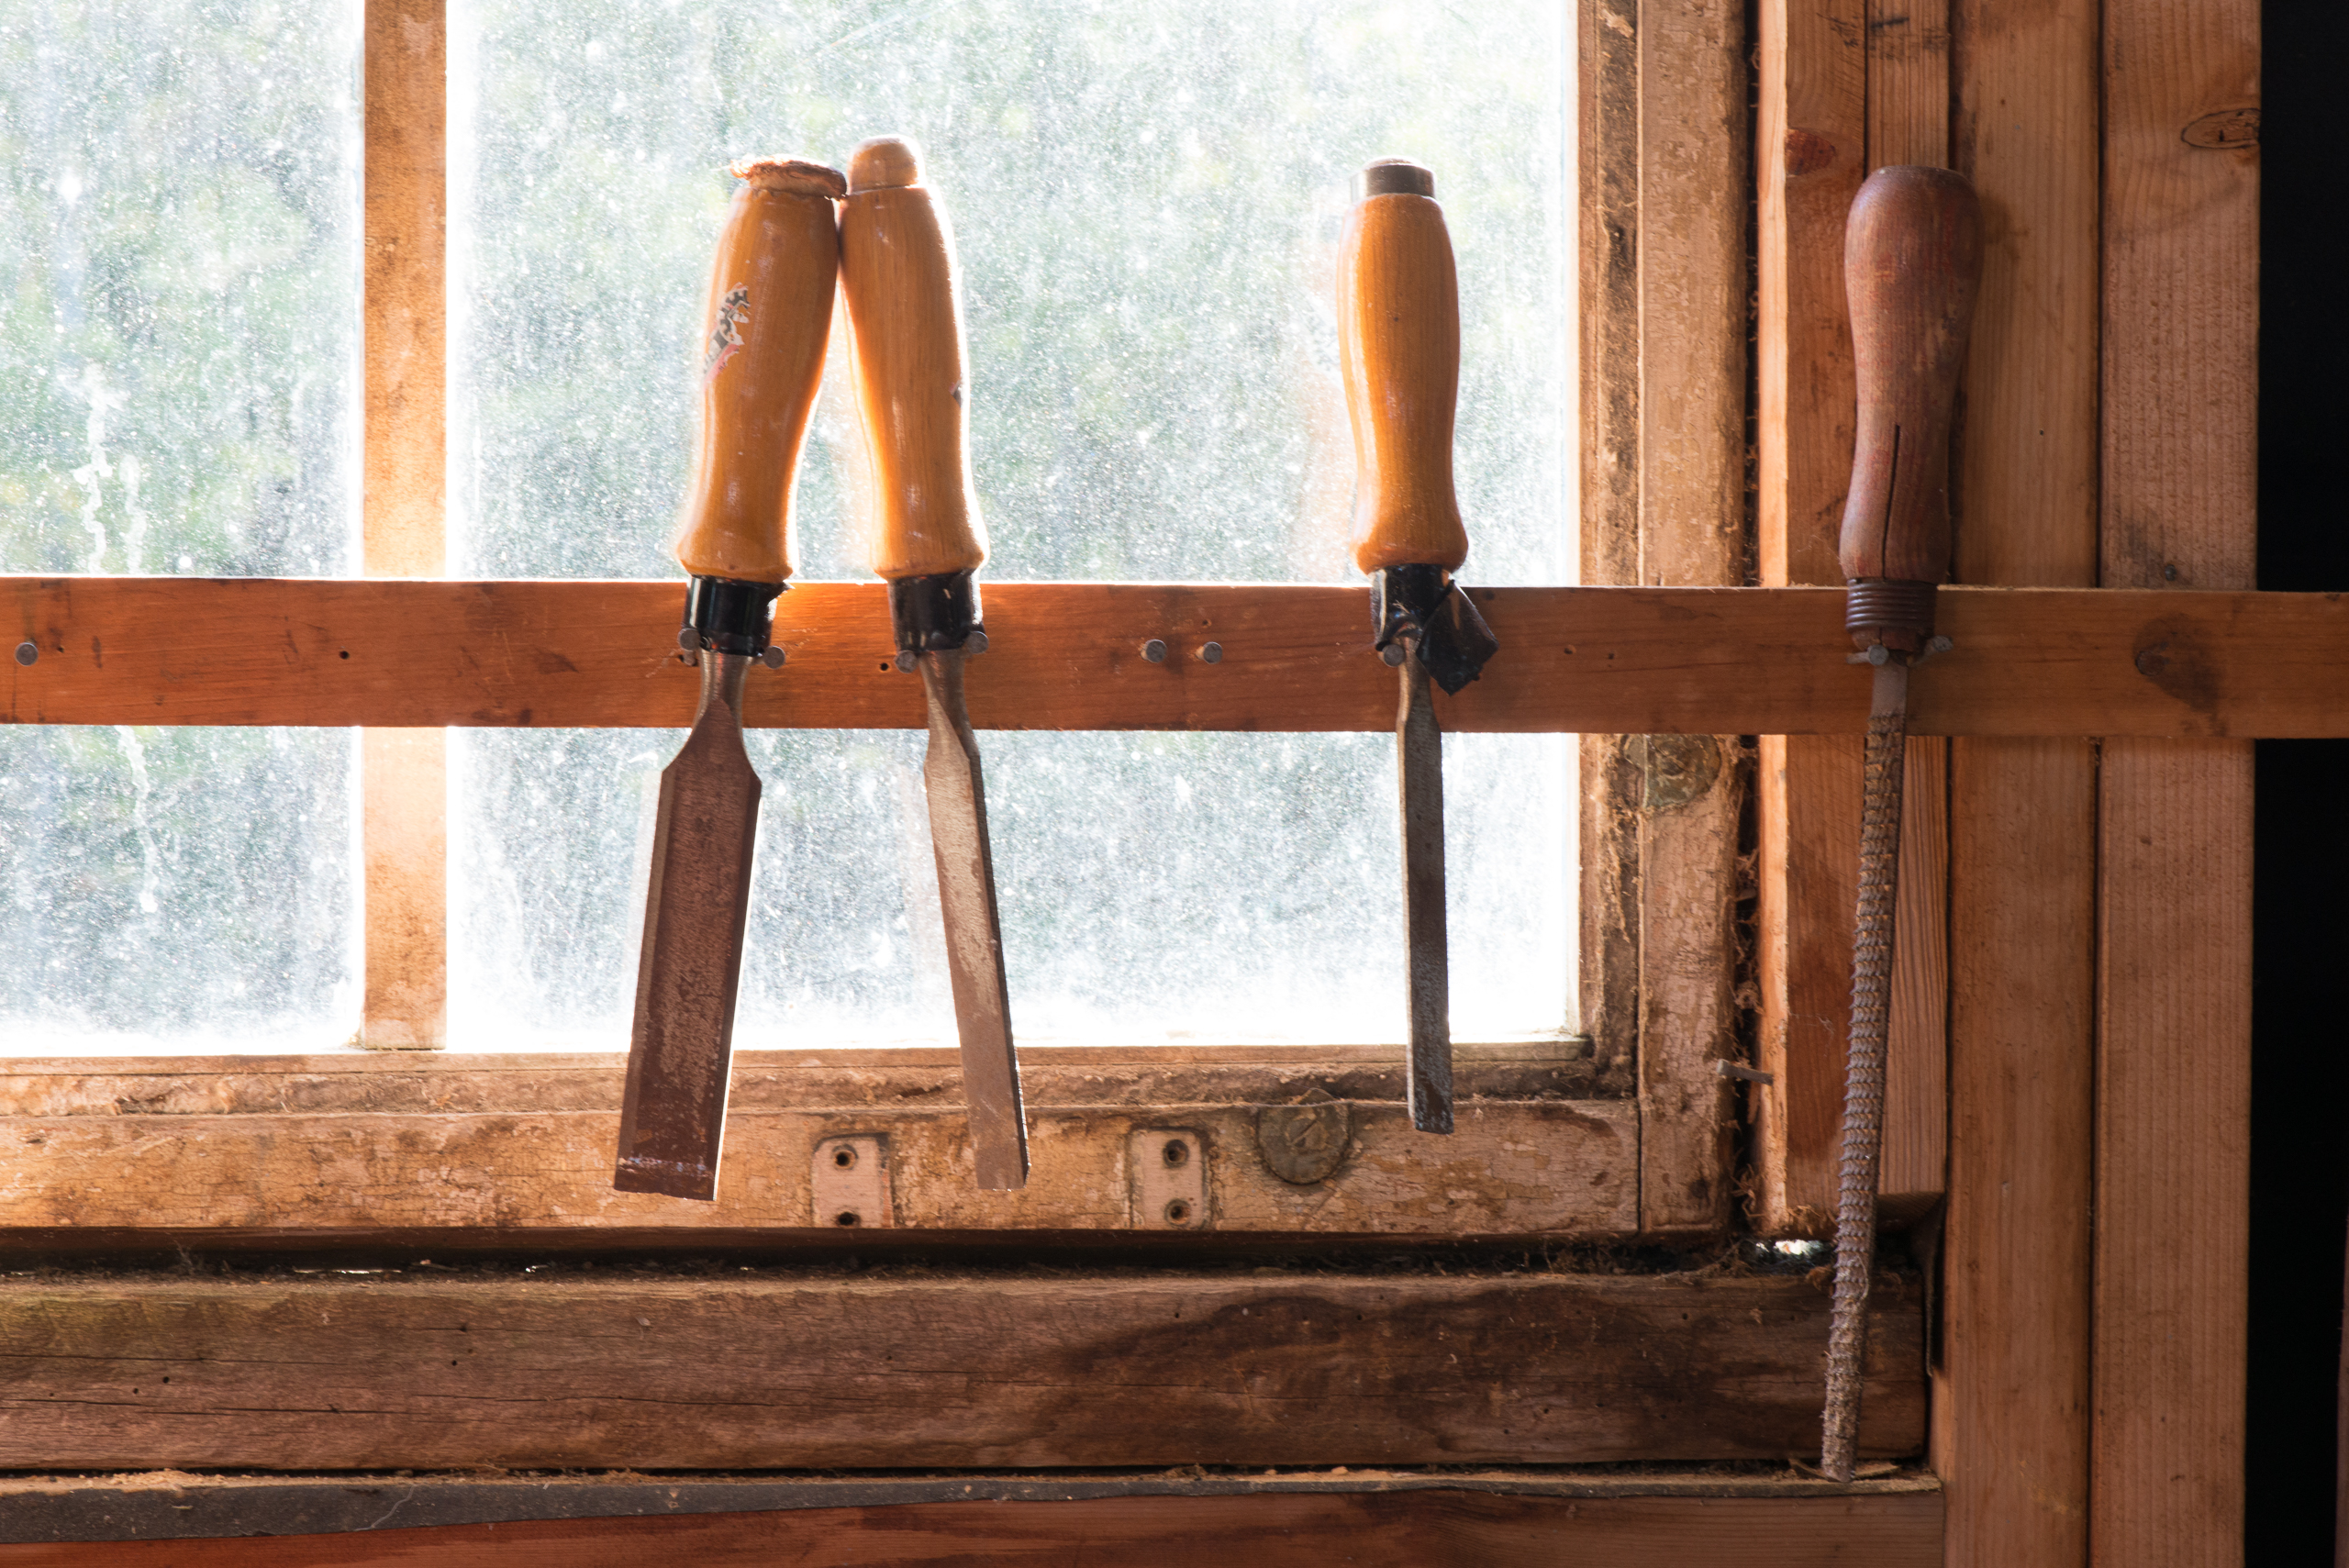 Three chisels and a rasp on a makeshift rack against a brightly lit window